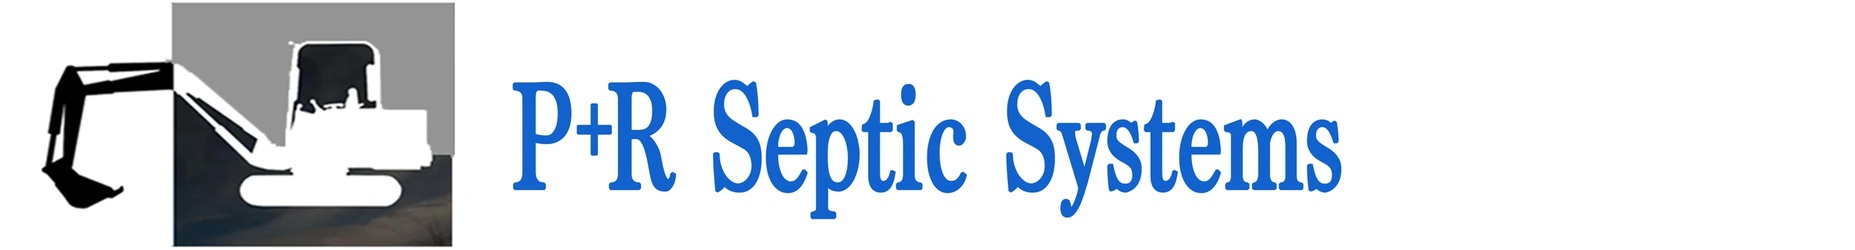   P+R Septic Systems